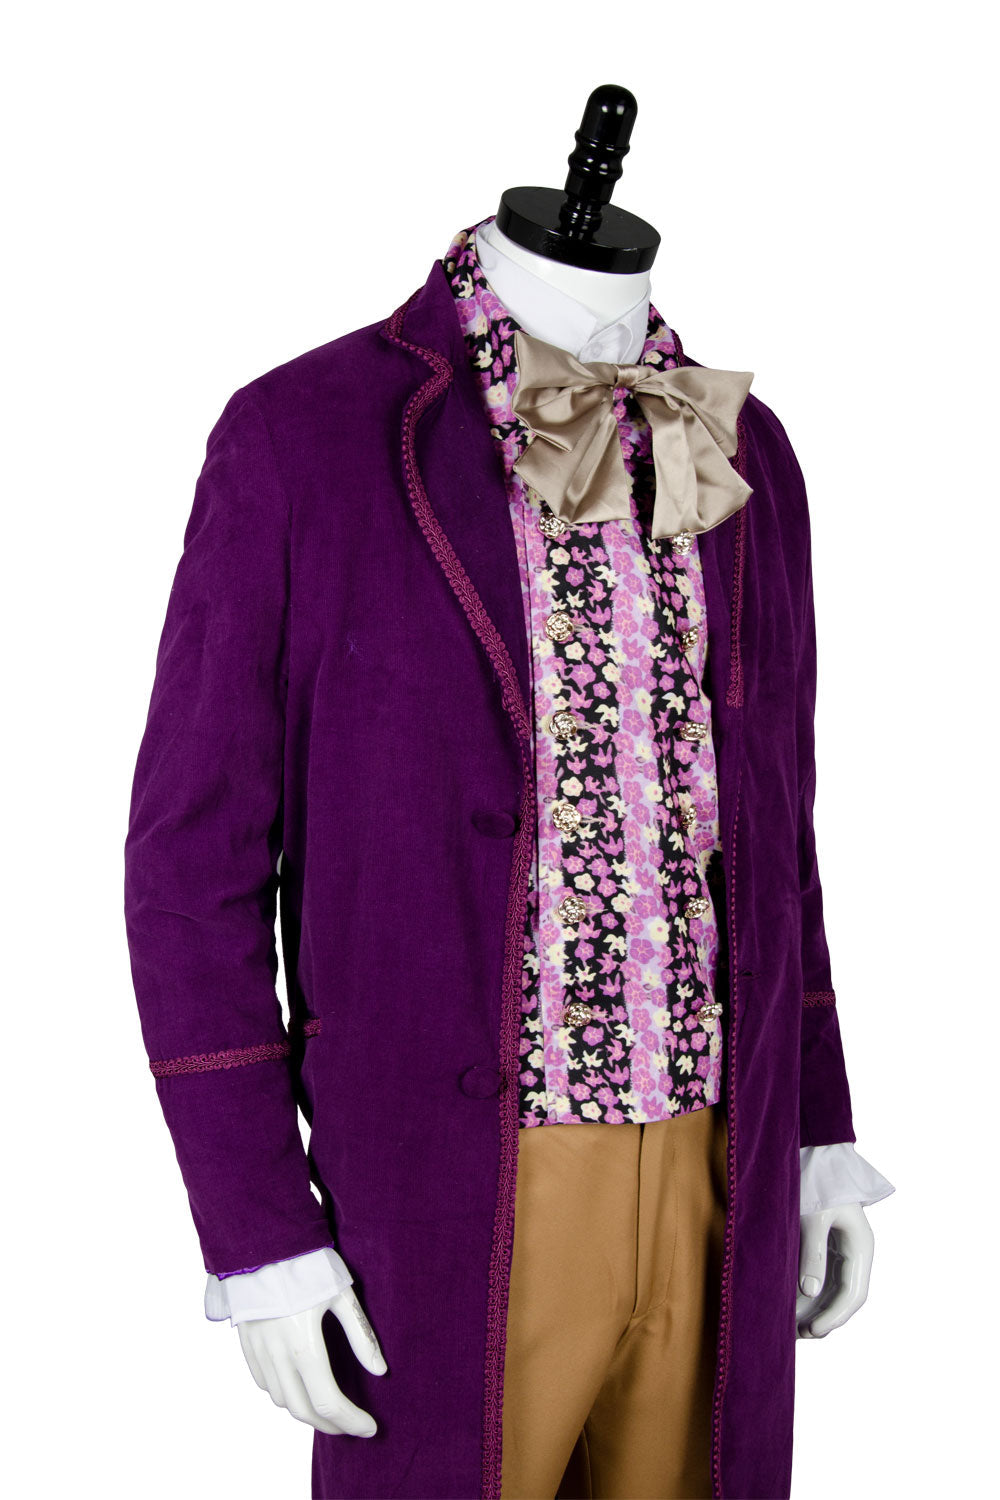 SeeCospaly Willy Wonka and the Chocolate Factory 1971 Willy Wonka Outfits Cosplay Costume